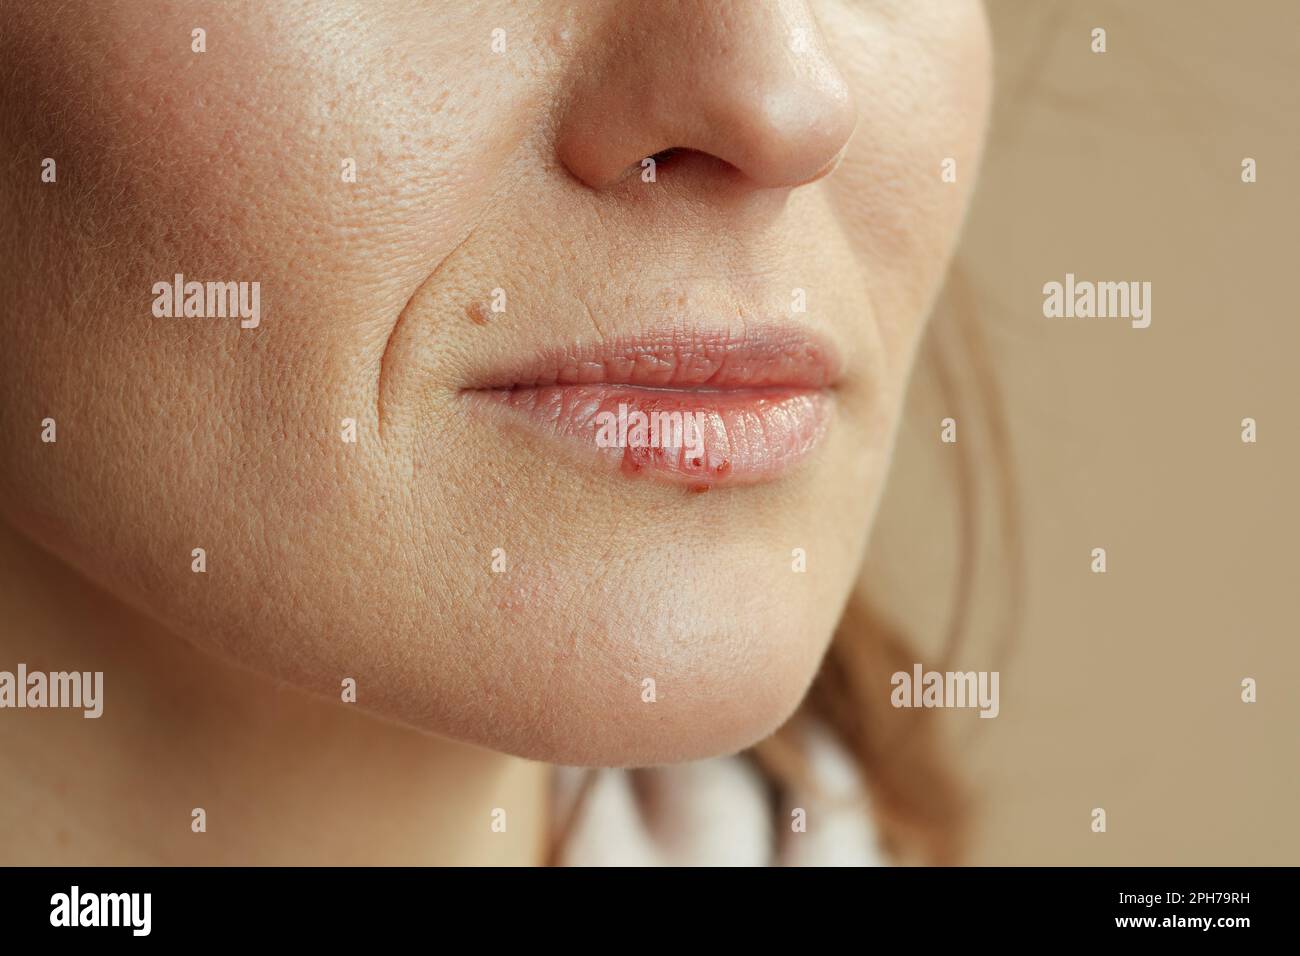 Closeup on woman with herpes on lips against beige background. Stock Photo